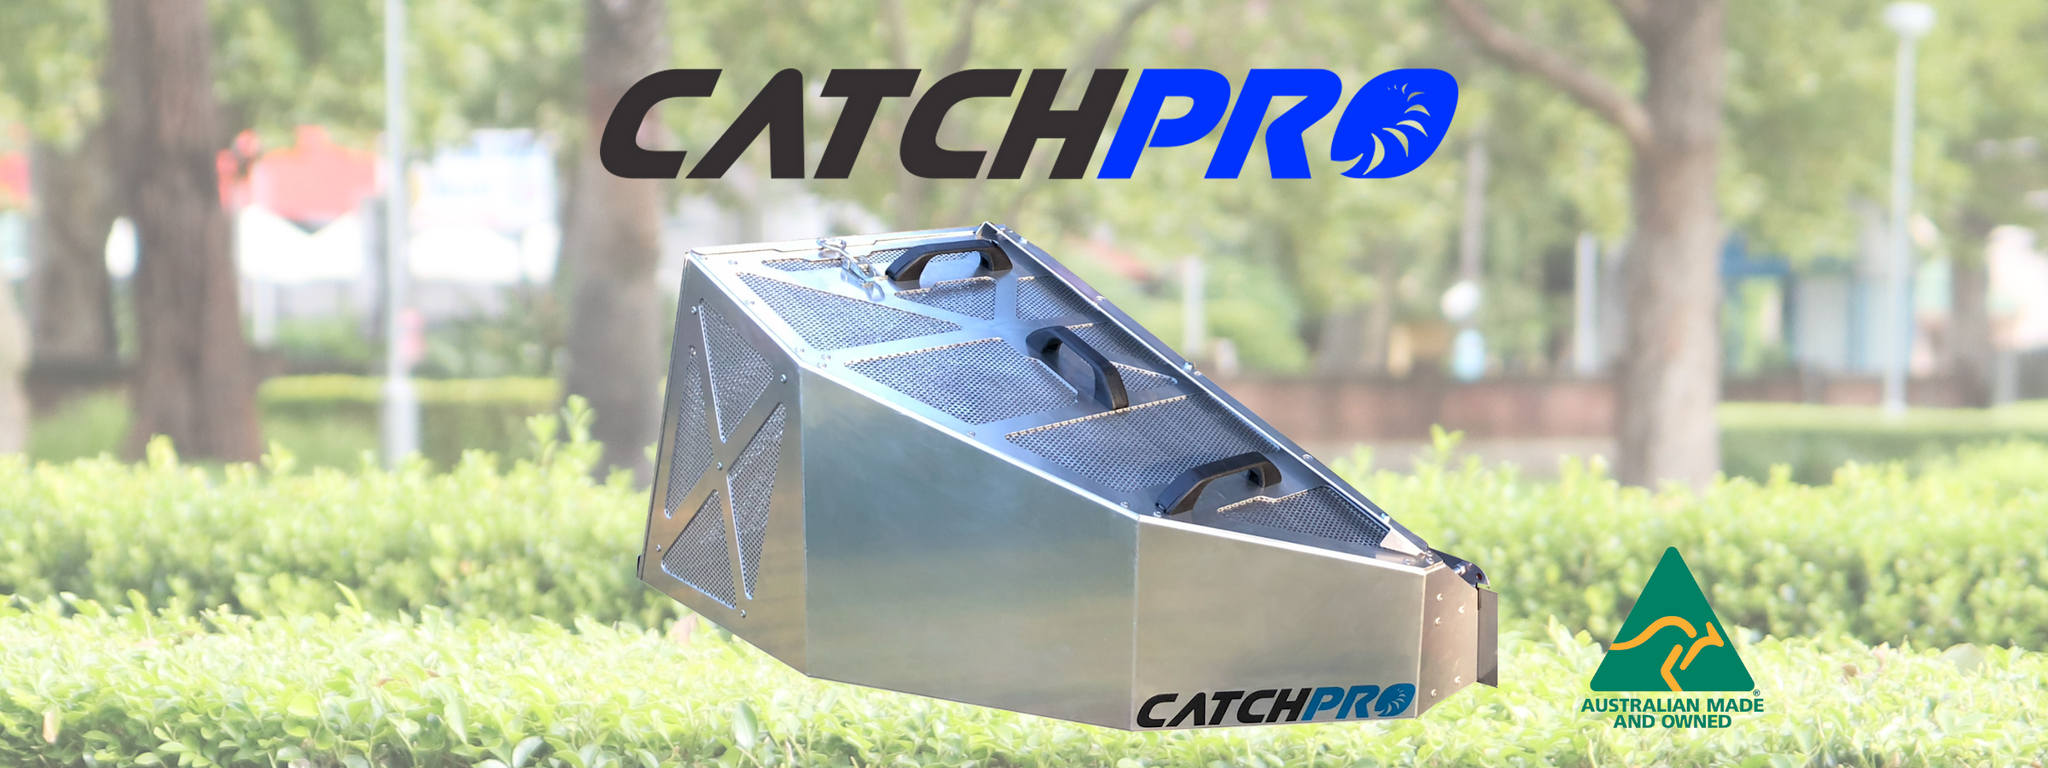 Catch Pro grass Catcher Bundles for Your Ride On Mower